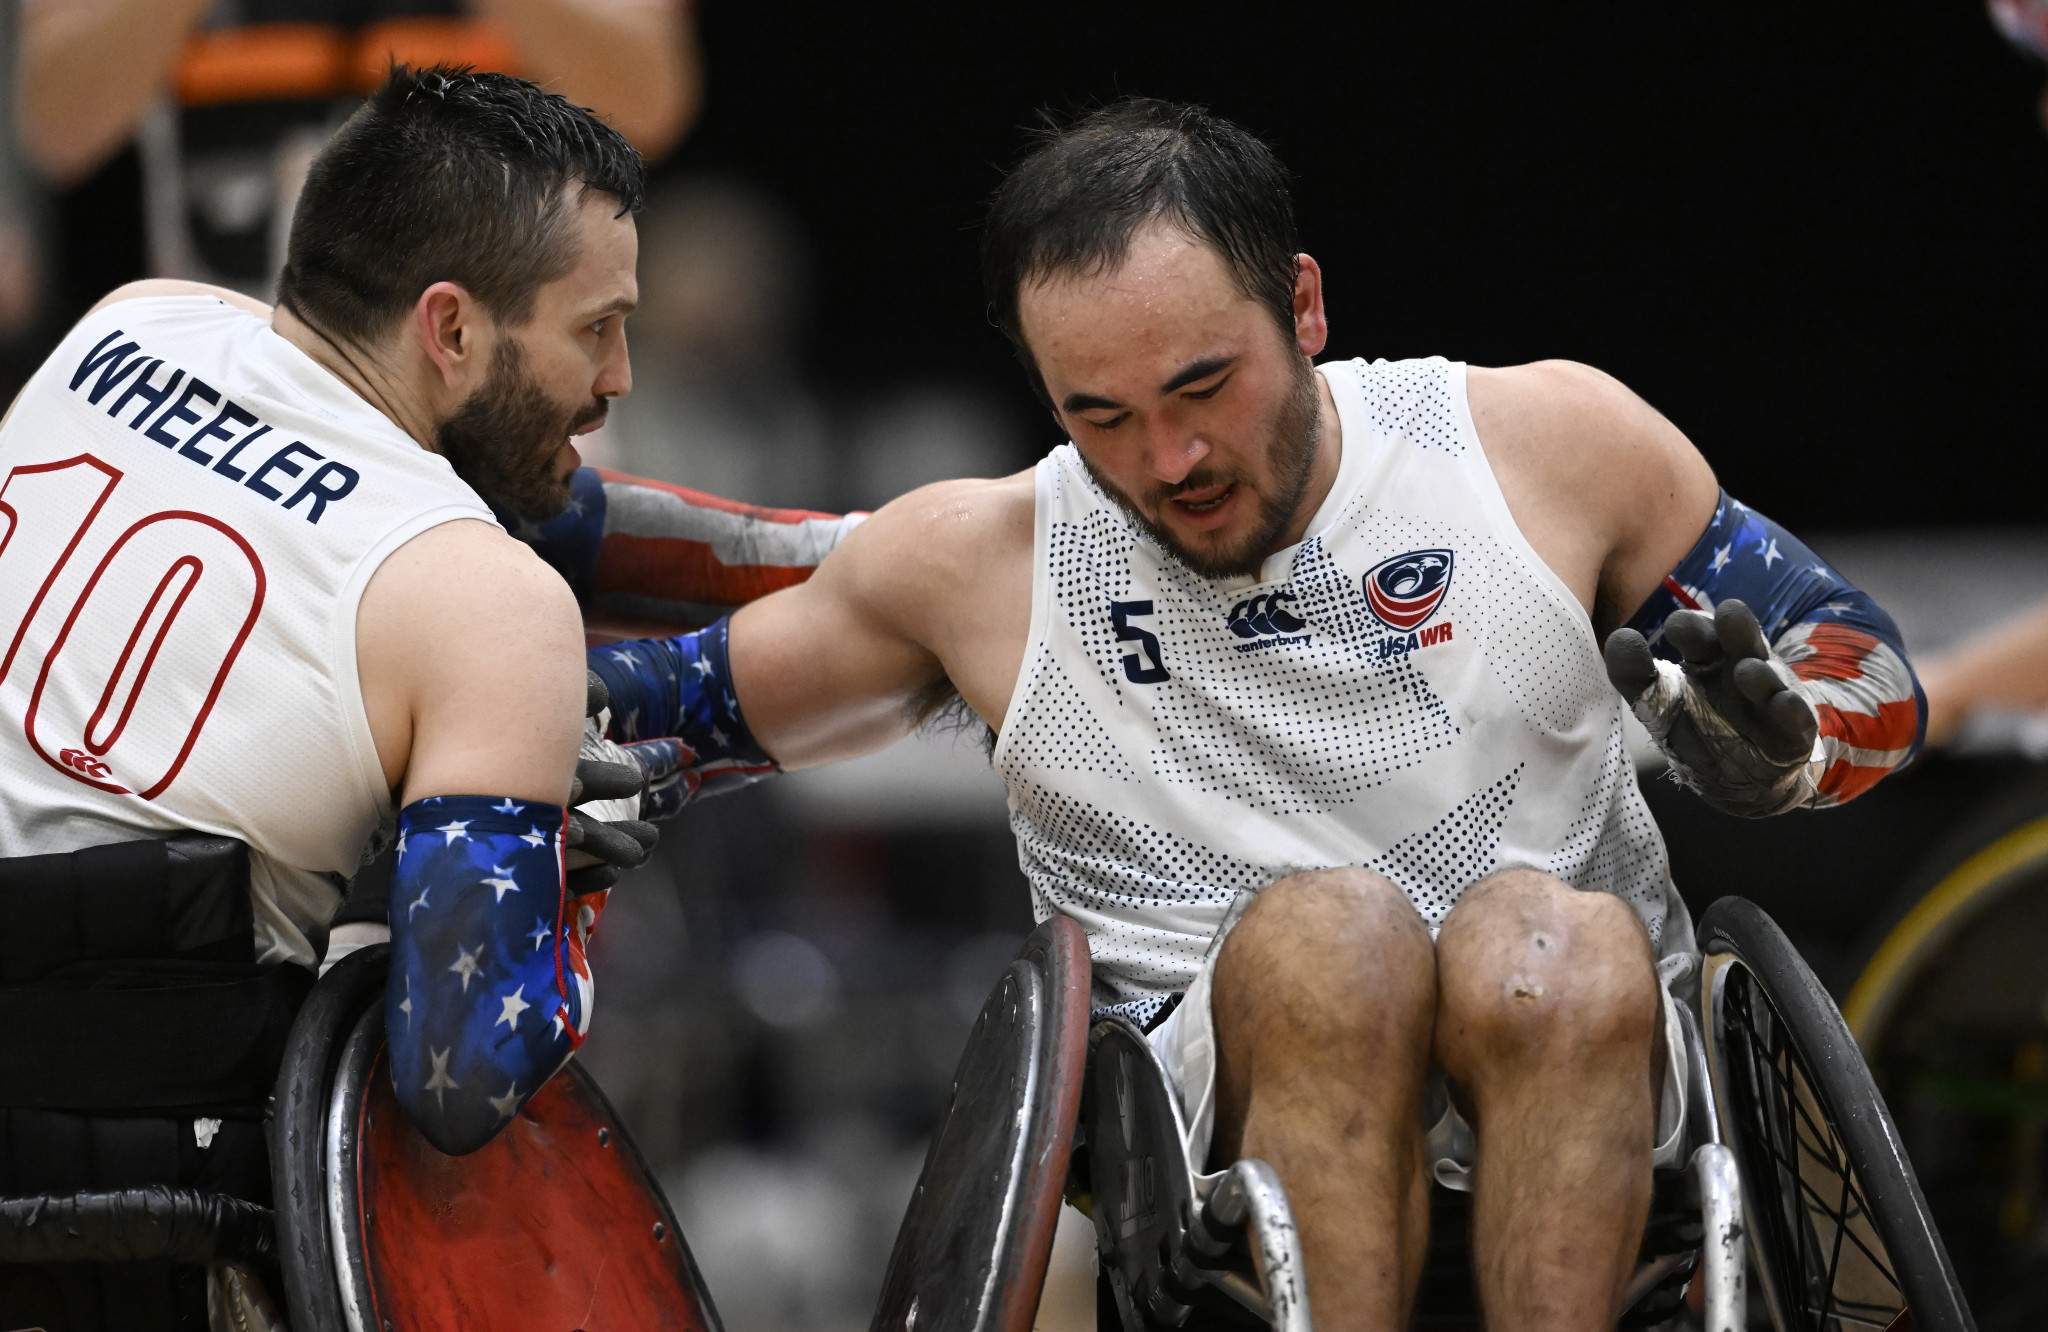 The United States could claim their fifth World Wheelchair Rugby Championship title ©Lars Møller/Parasport Denmark